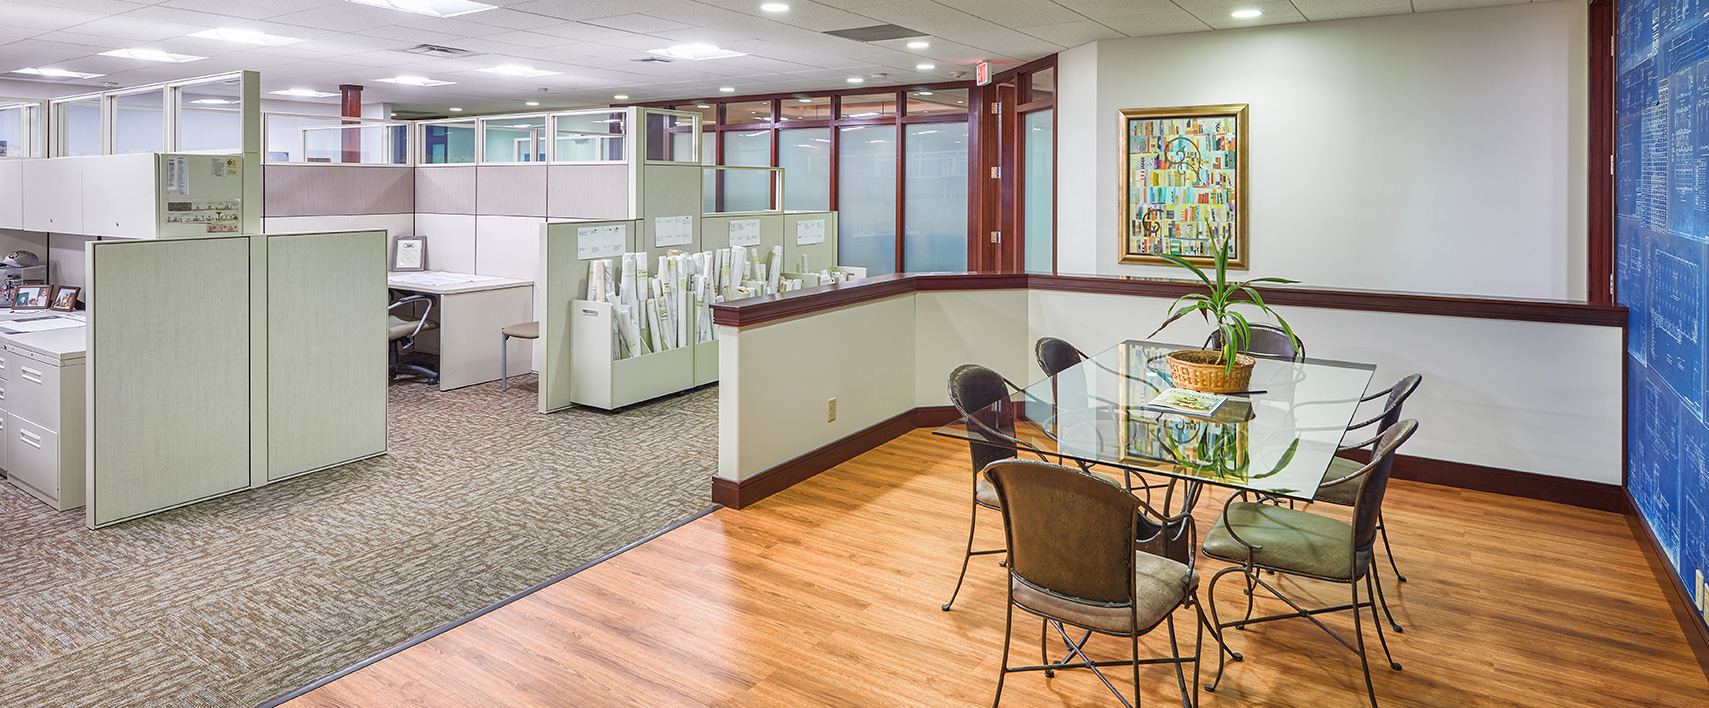 Office Remodeling & Buildout in Broomall